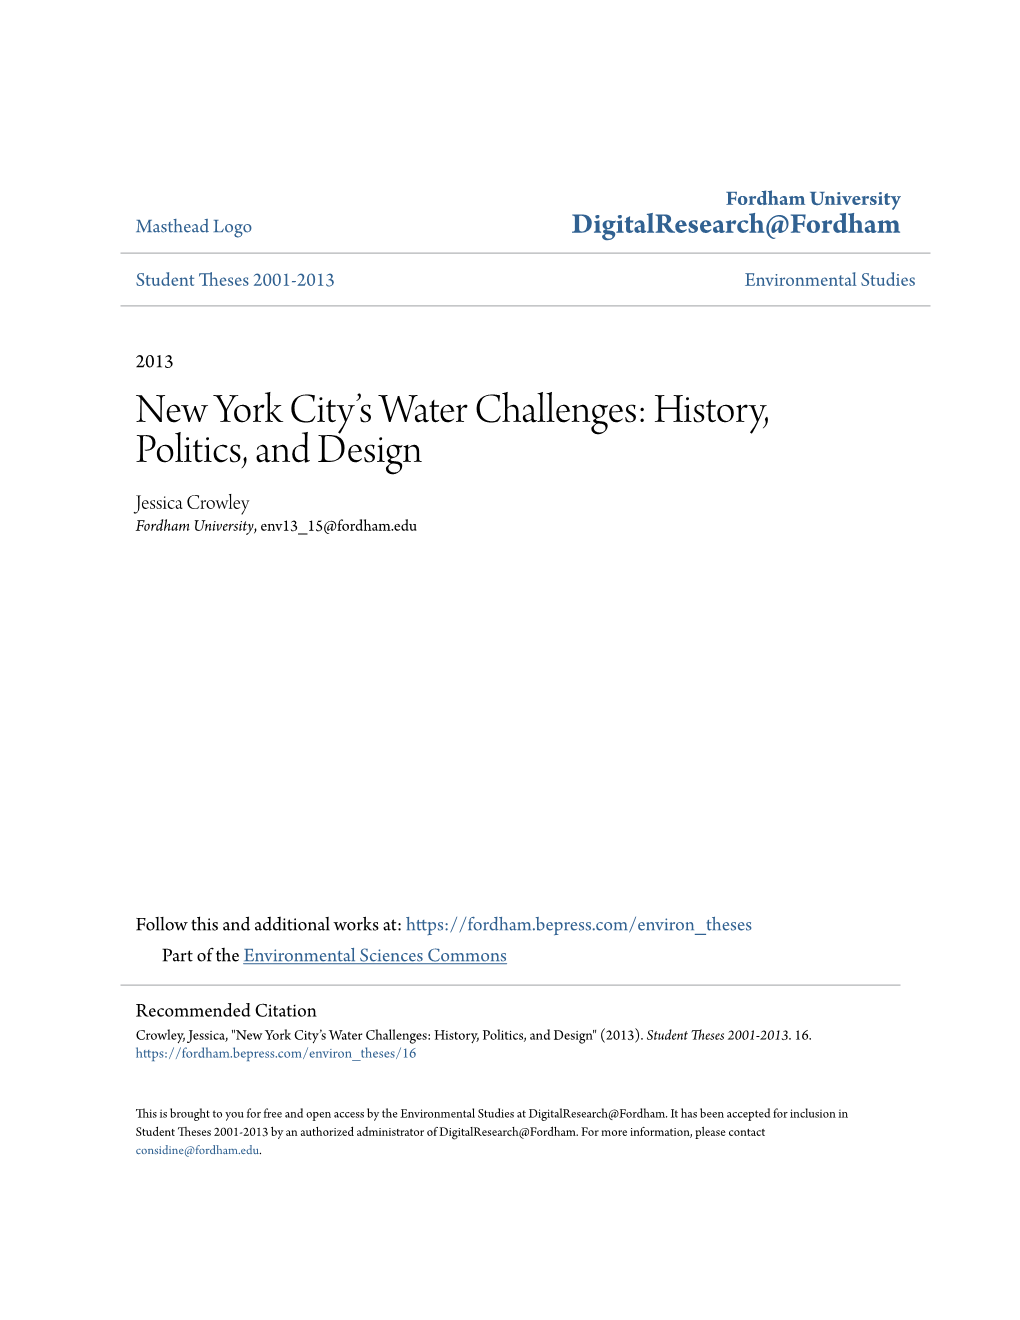 New York City's Water Challenges: History, Politics, and Design